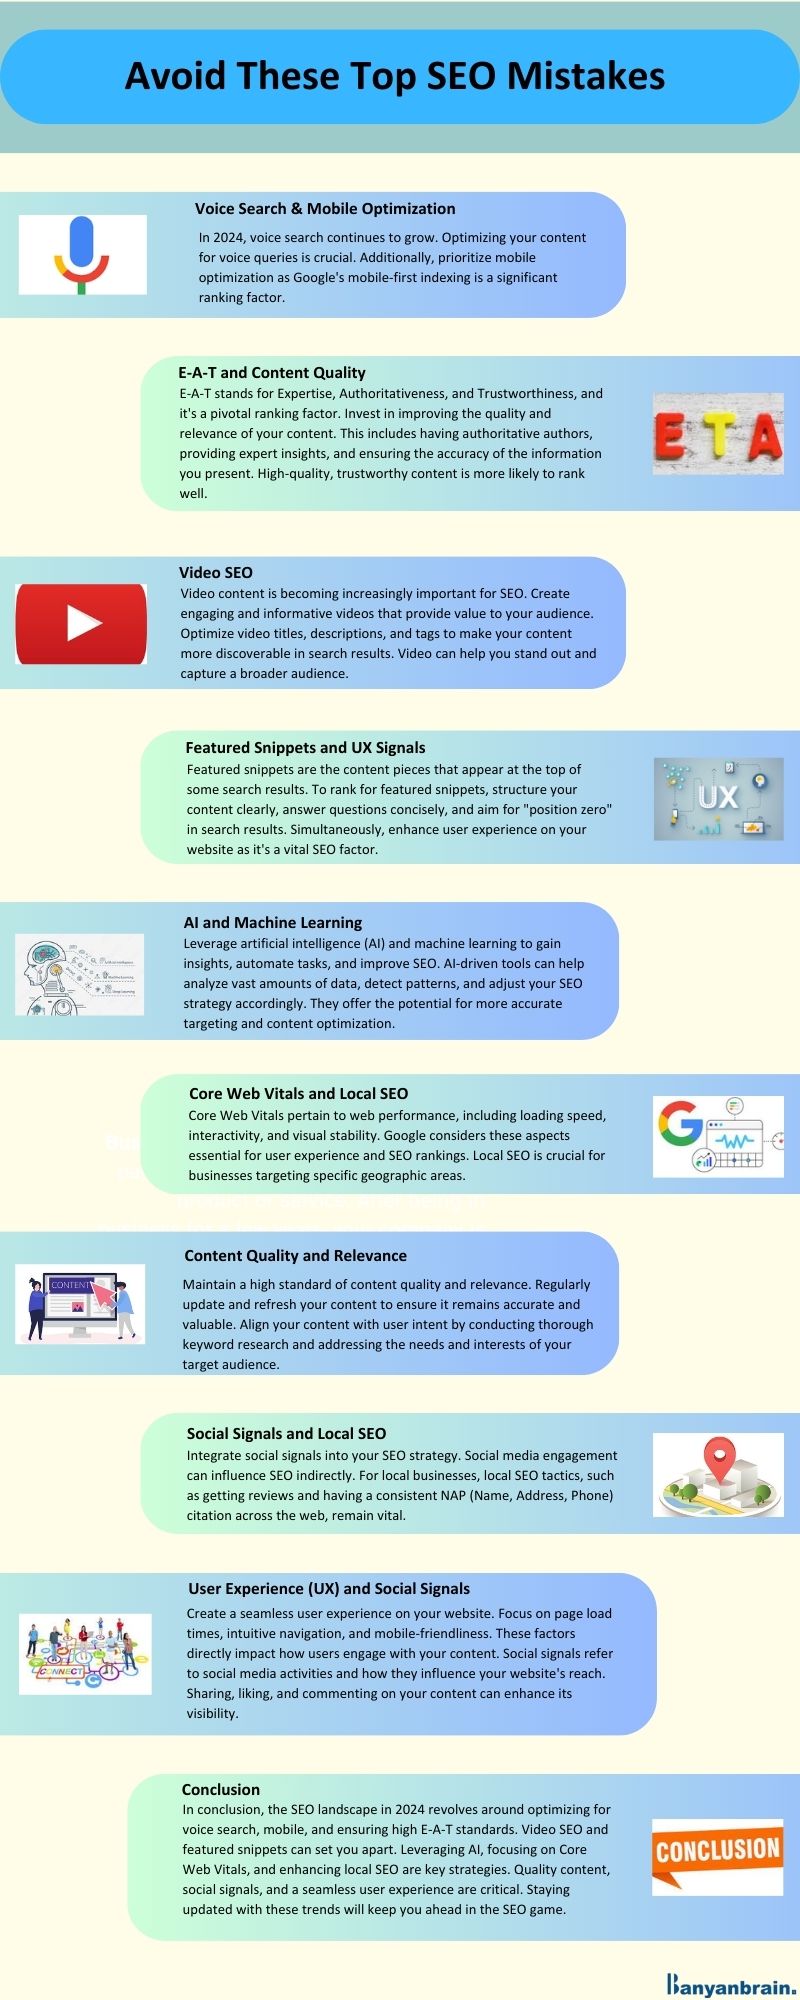 Infographic illustrating the top 10 SEO mistakes, including keyword stuffing, neglecting mobile optimization, ignoring metadata, skipping quality content, overlooking analytics, poor link practices, not utilizing social media, forgetting local SEO, slow site speed, and failing to update regularly.